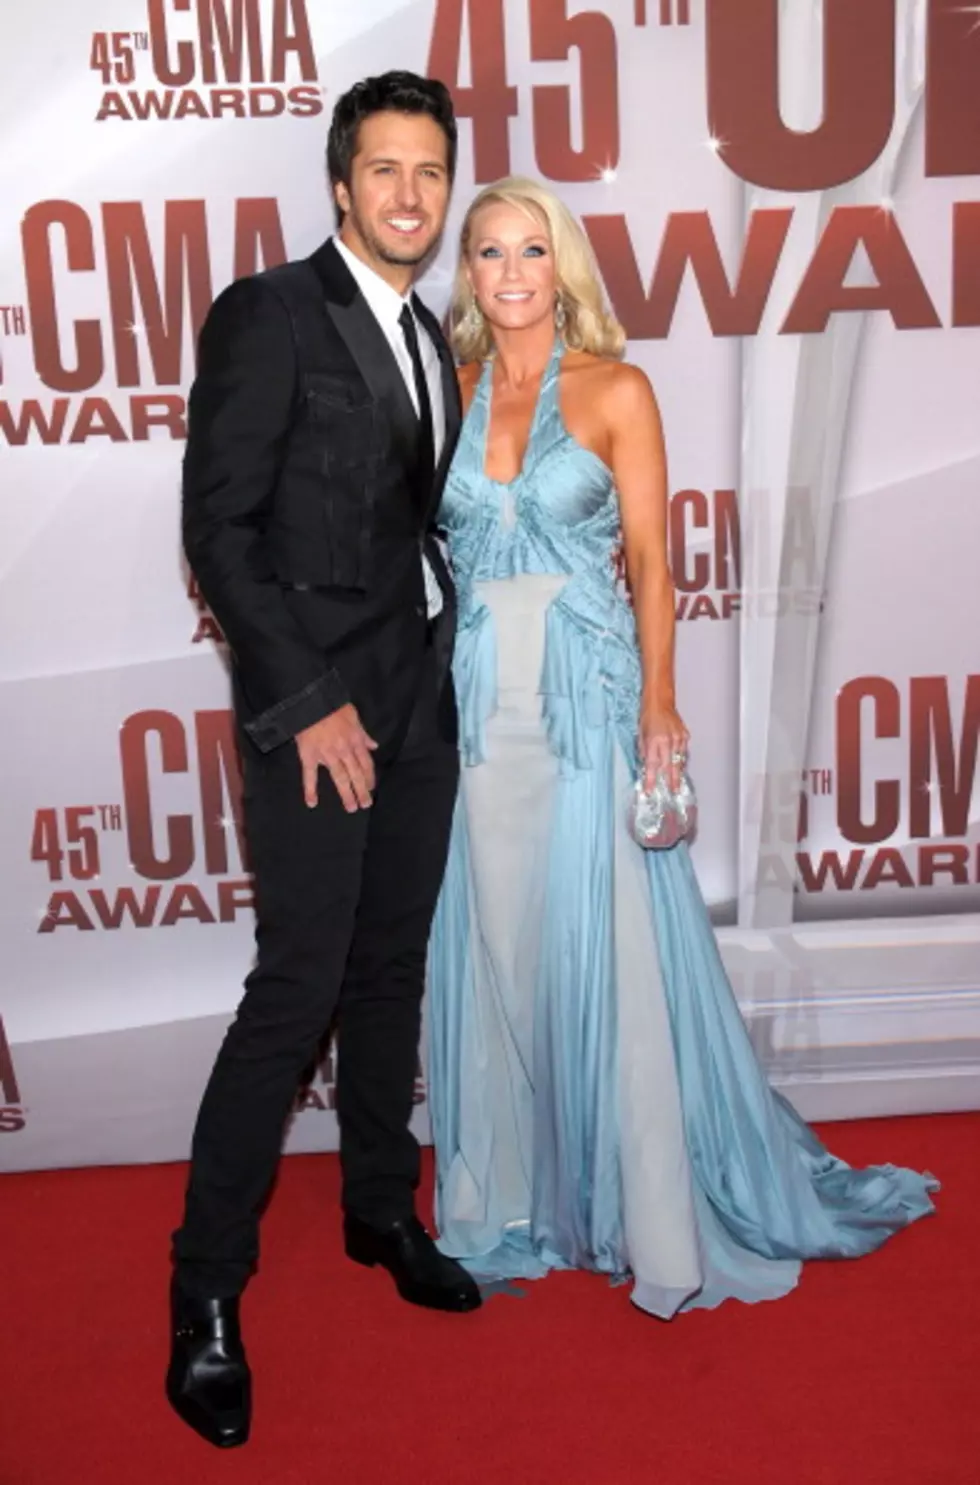 Luke Bryan Ends Up In A Fishy Situation On Anniversary